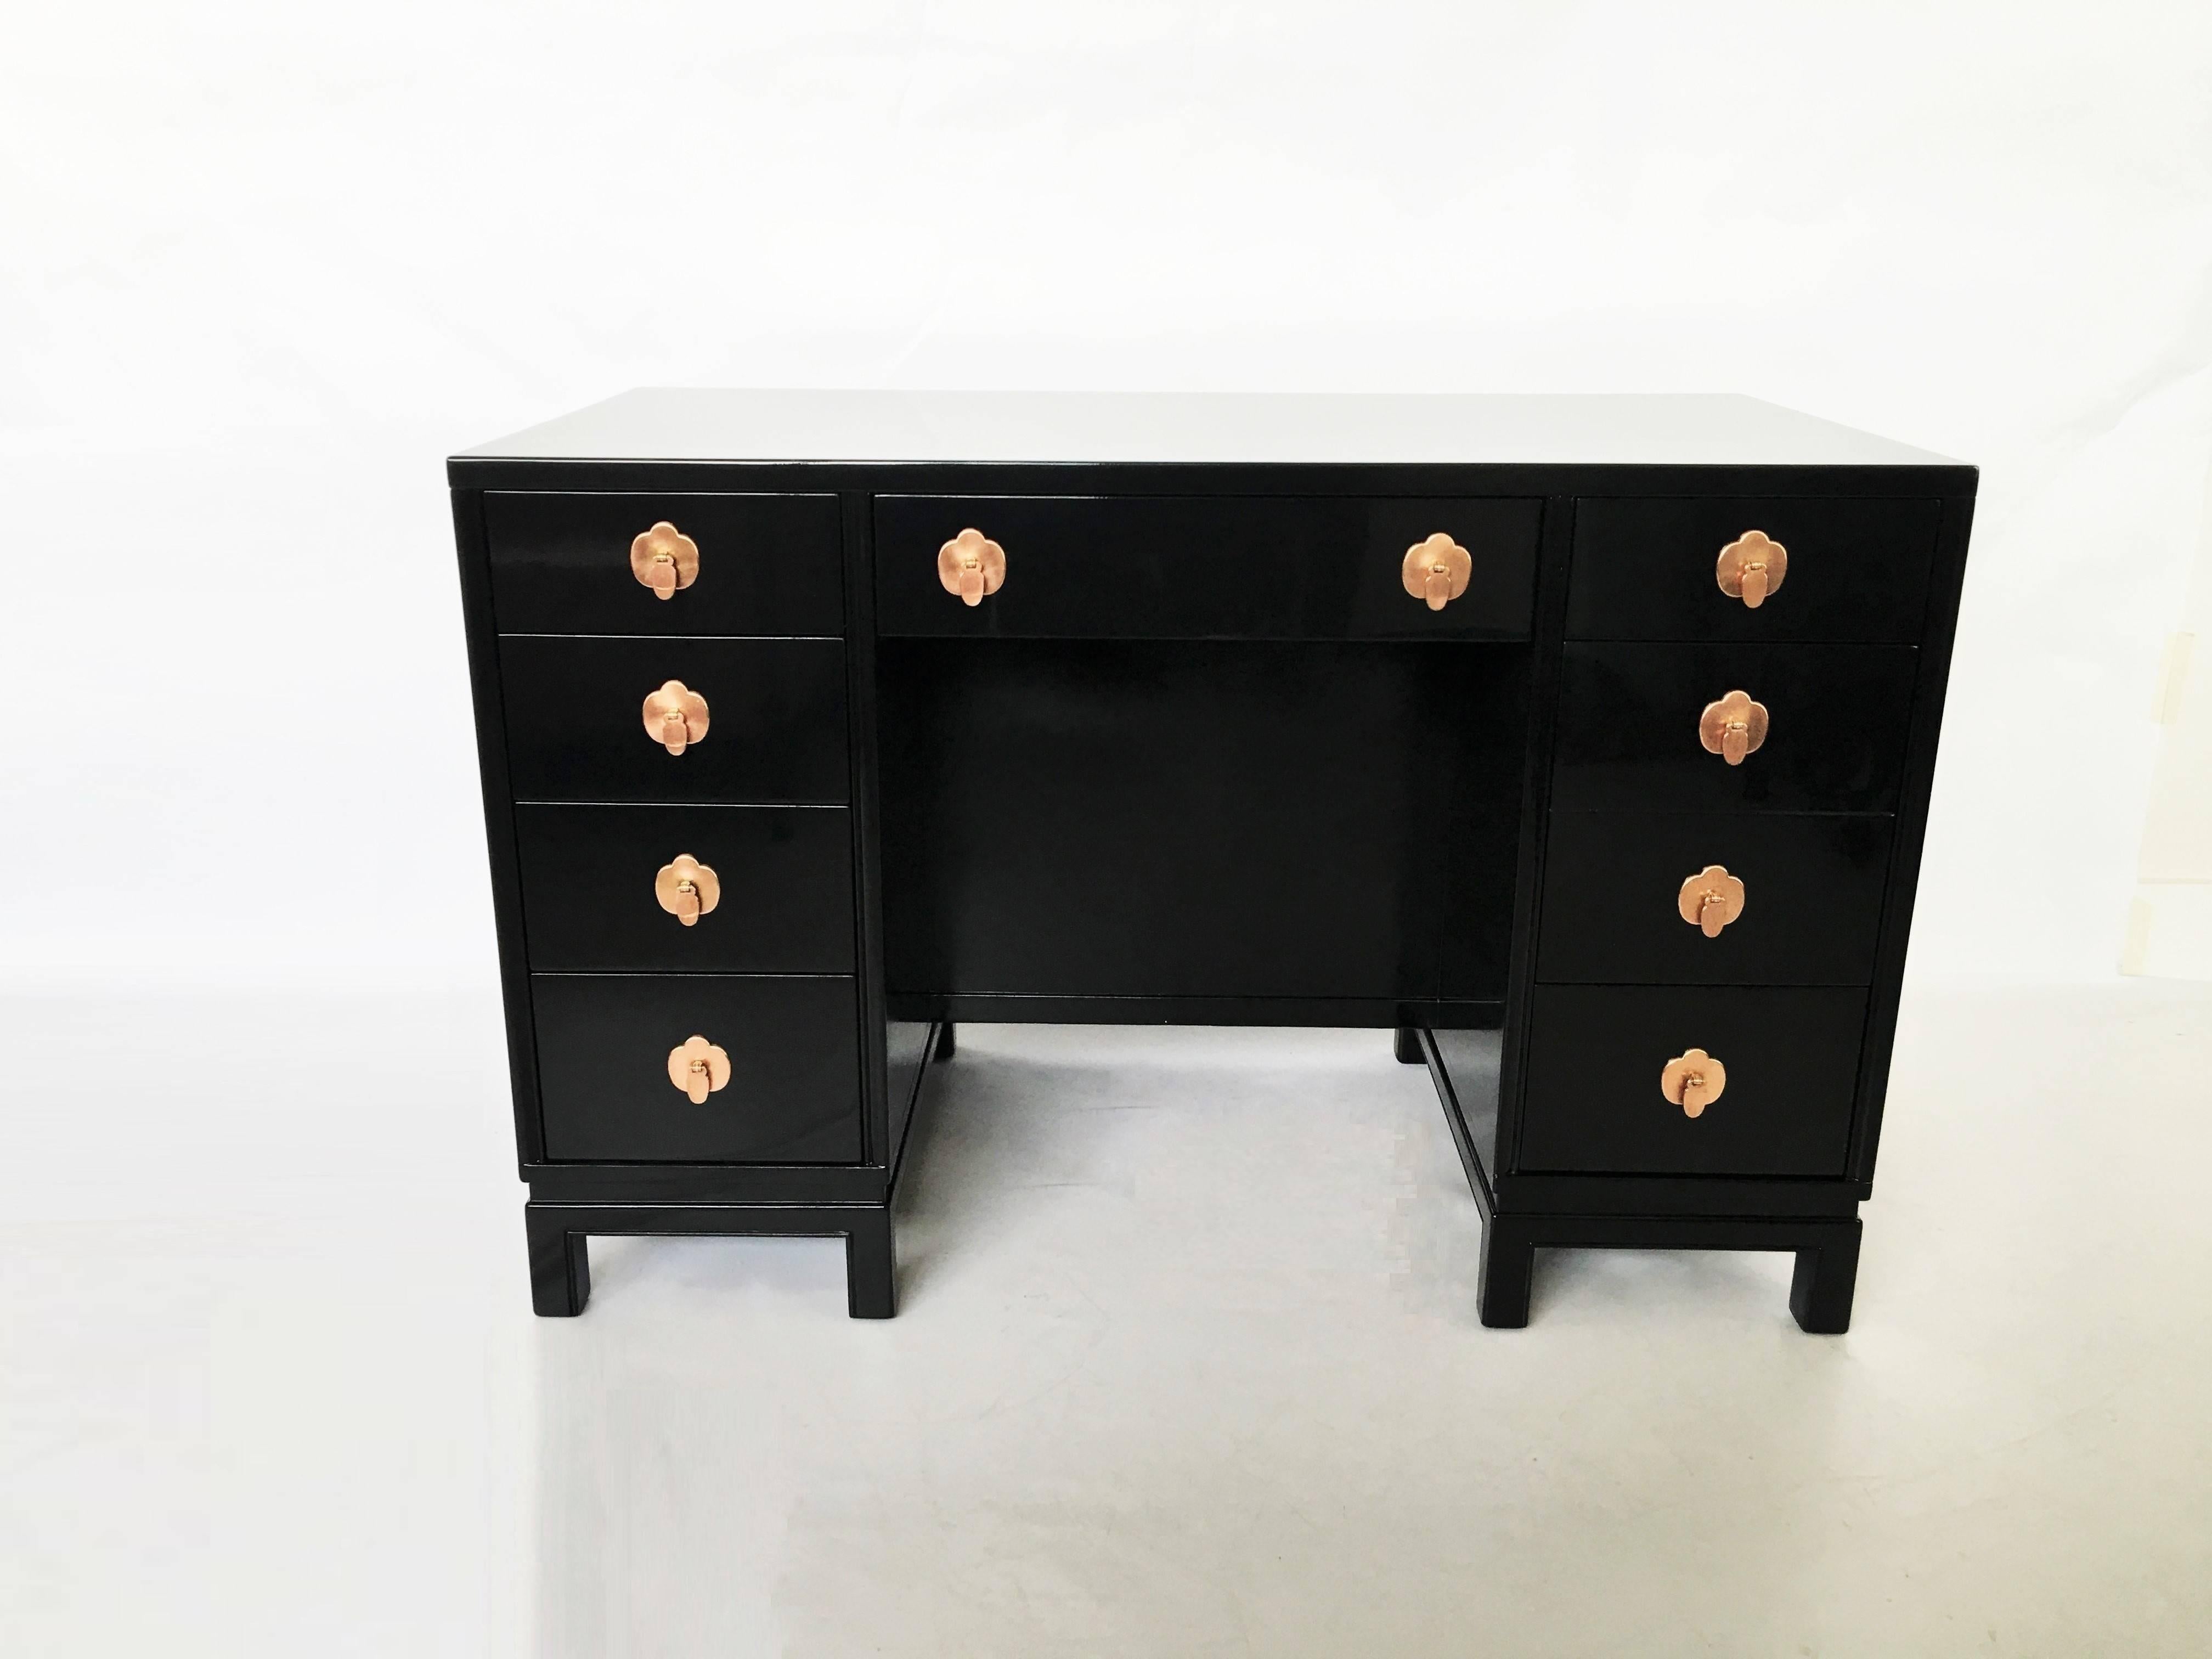 Newly lacquered desk by Landstrom Furniture. Featuring four drawers to the left, a single drawer above the opening and three drawers to the right. Copper drop disc pulls and trefoil escutcheons. The shelves to the opposite side of this perfectly